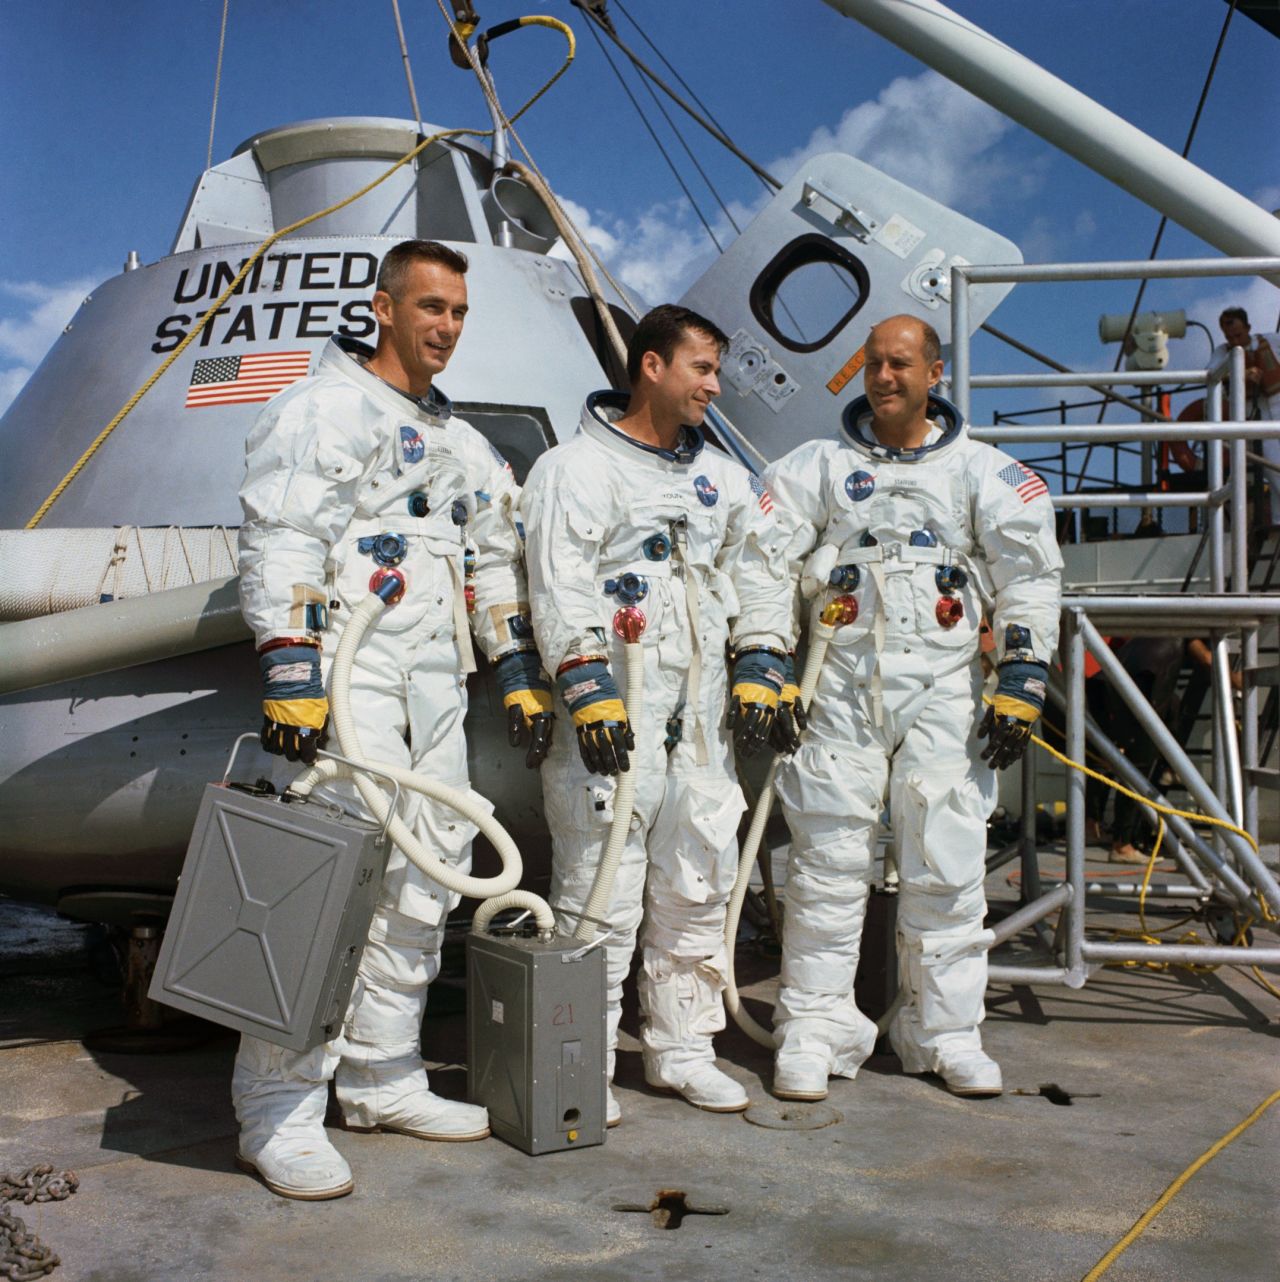 The Apollo 10 mission was just like a lunar landing mission -- but without the landing. Crew members, from left, are Gene Cernan, John Young and Thomas Stafford. They launched on May 18, 1969, made 31 orbits of the moon and splashed down in the Pacific on May 26.